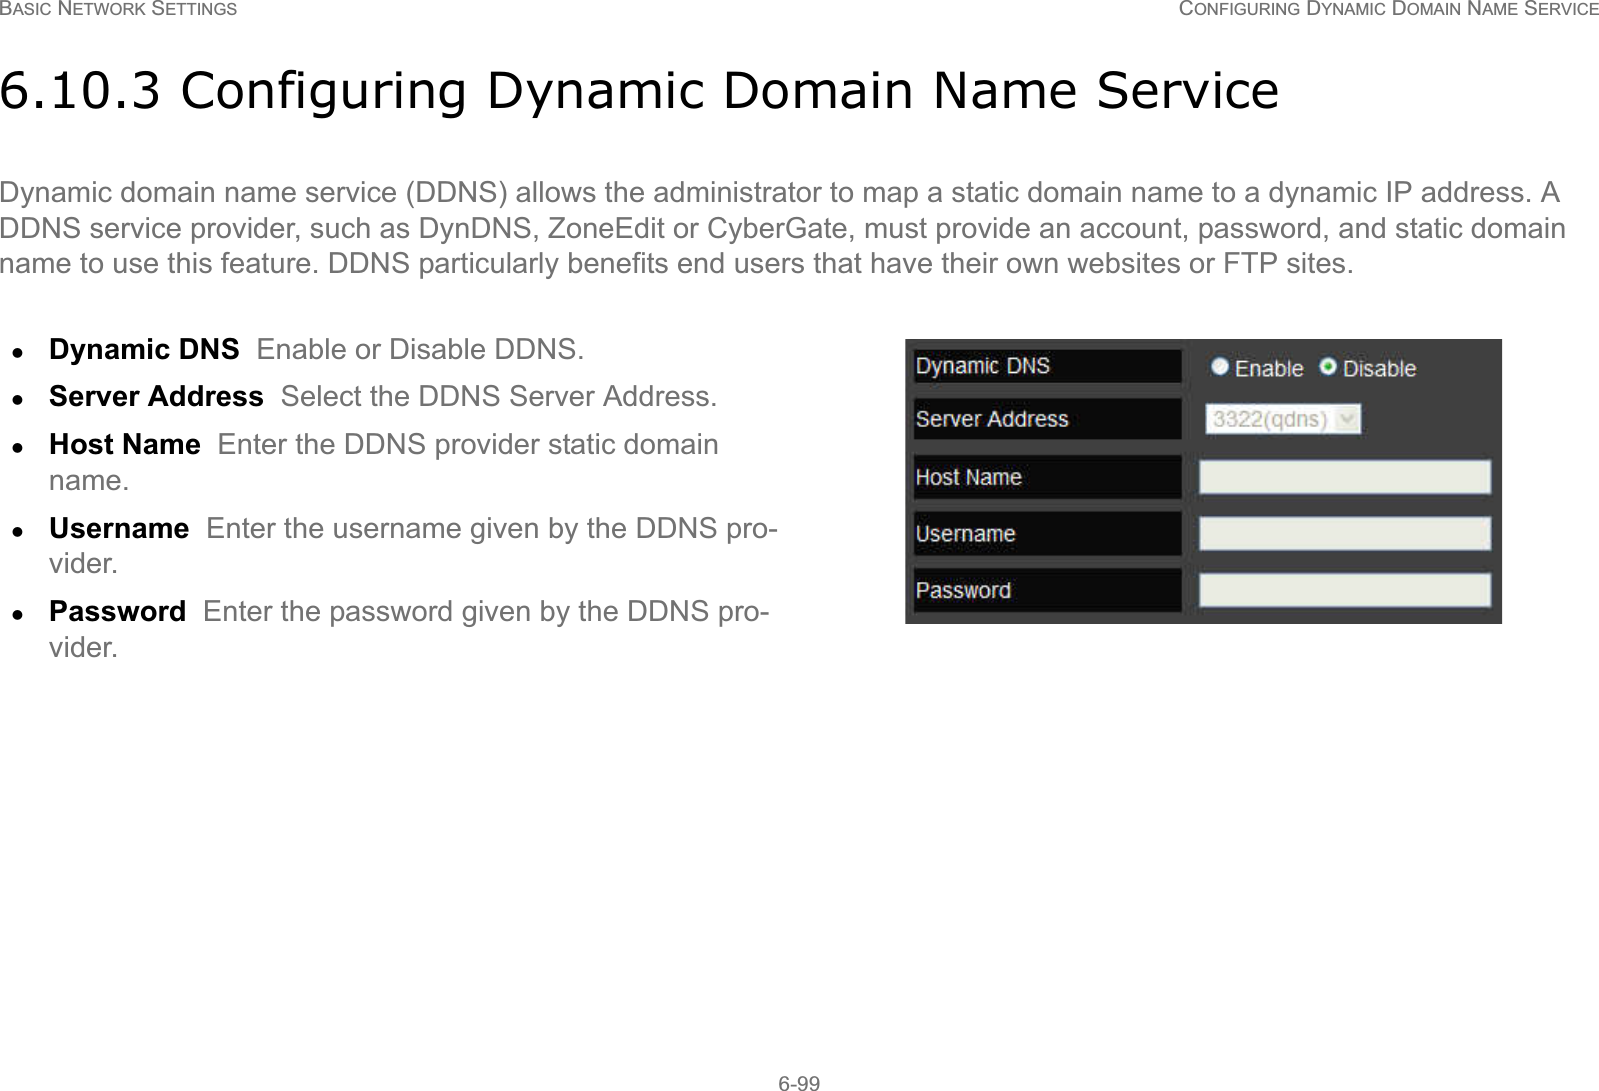 BASIC NETWORK SETTINGS CONFIGURING DYNAMIC DOMAIN NAME SERVICE6-996.10.3 Configuring Dynamic Domain Name ServiceDynamic domain name service (DDNS) allows the administrator to map a static domain name to a dynamic IP address. A  DDNS service provider, such as DynDNS, ZoneEdit or CyberGate, must provide an account, password, and static domain name to use this feature. DDNS particularly benefits end users that have their own websites or FTP sites.zDynamic DNS  Enable or Disable DDNS.zServer Address  Select the DDNS Server Address.zHost Name  Enter the DDNS provider static domain name.zUsername  Enter the username given by the DDNS pro-vider.zPassword  Enter the password given by the DDNS pro-vider.